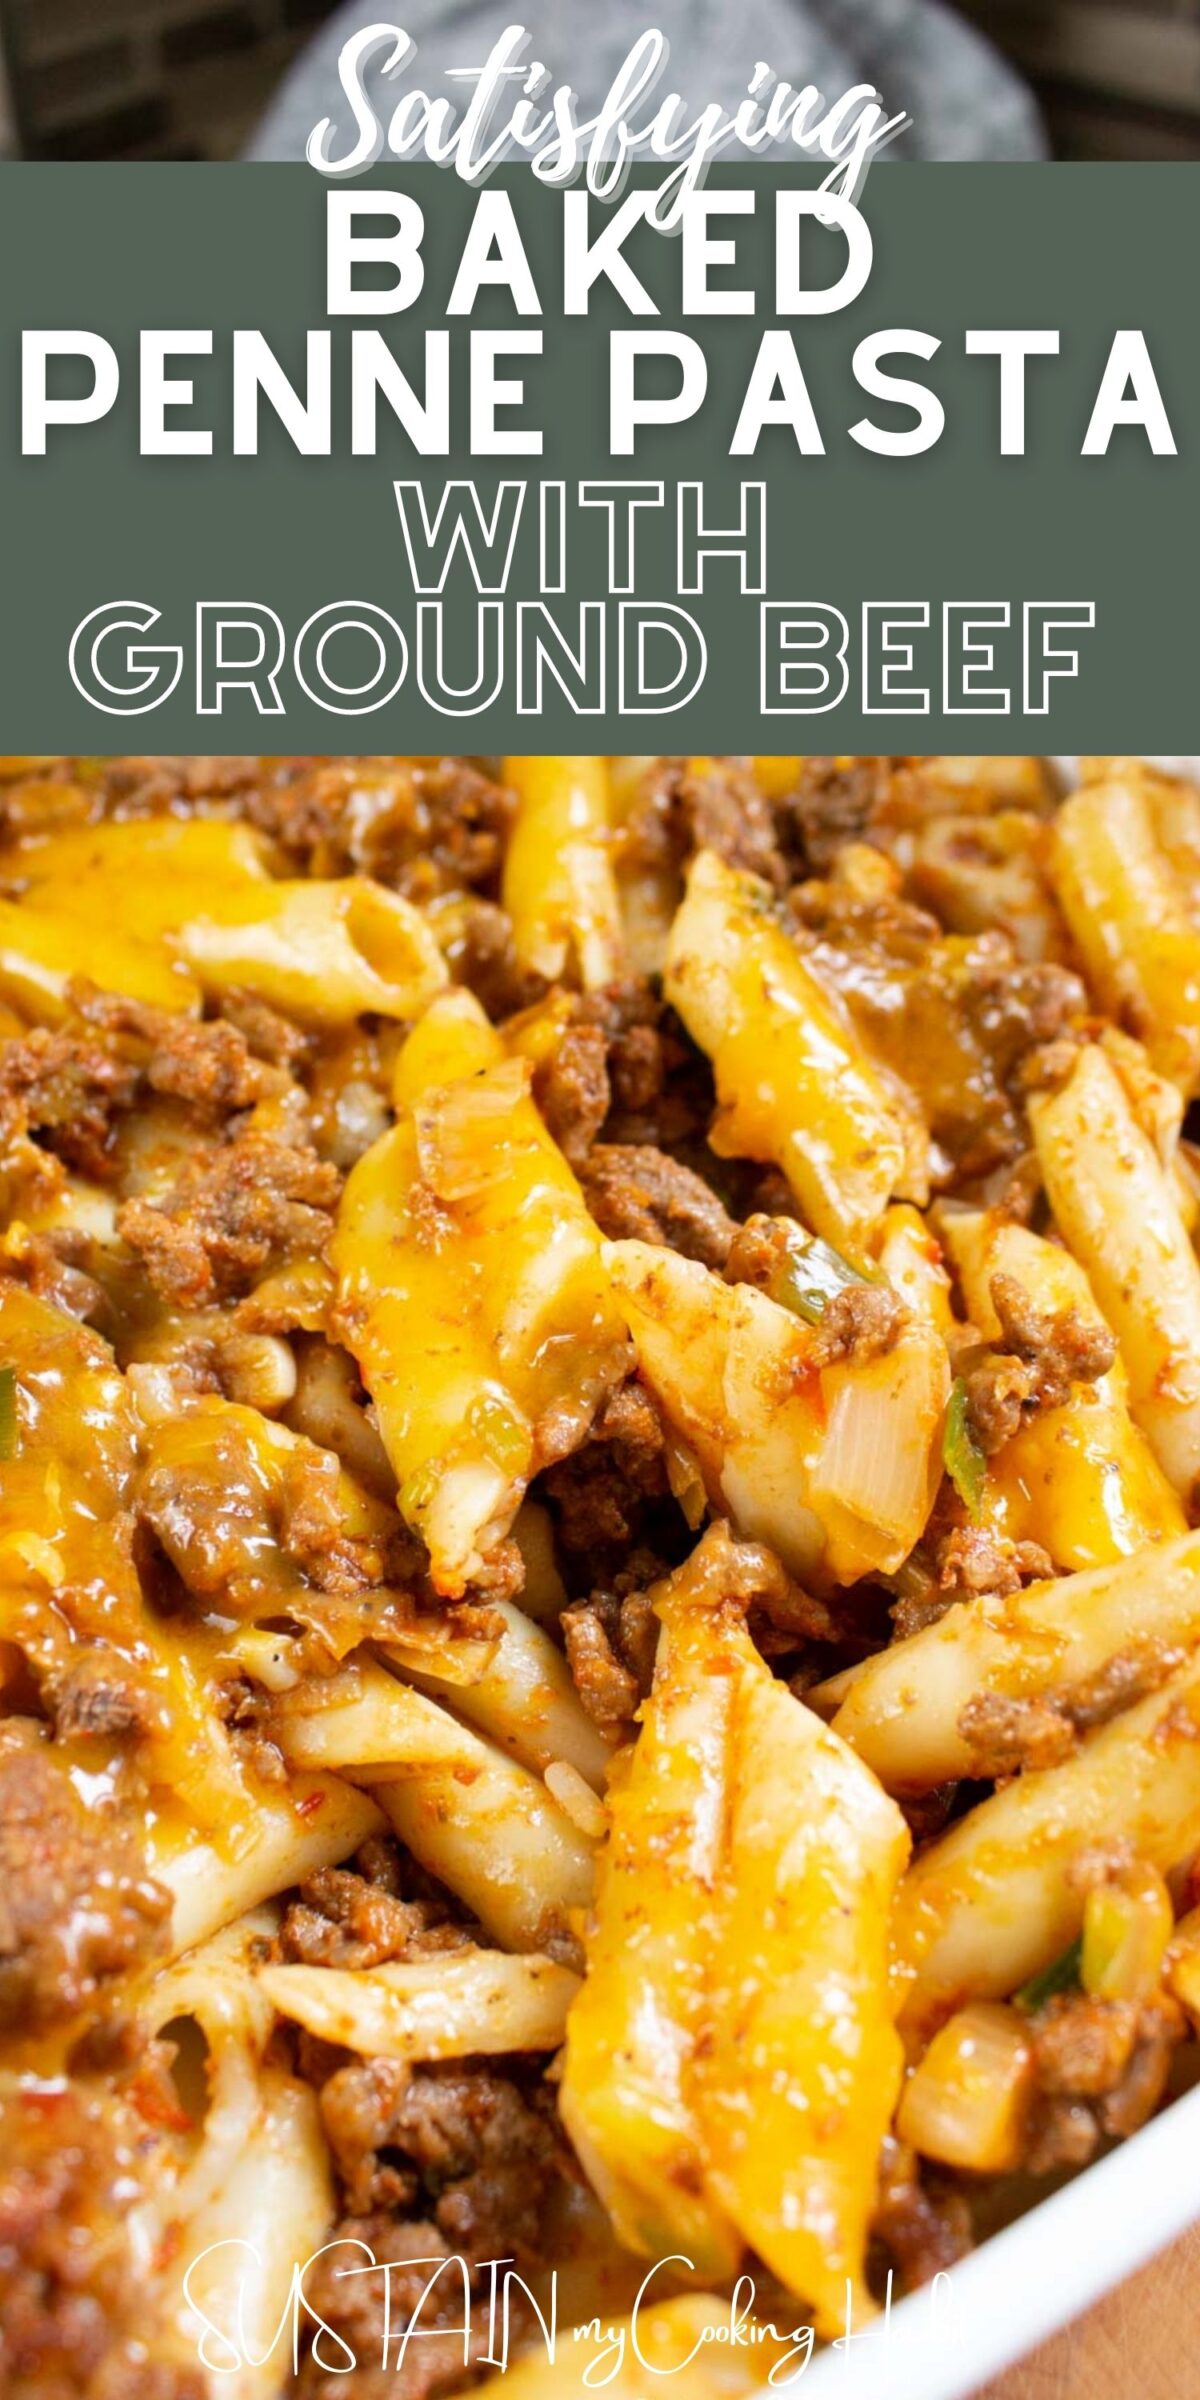 Close up of baked penne pasta with ground beef with text overlay.